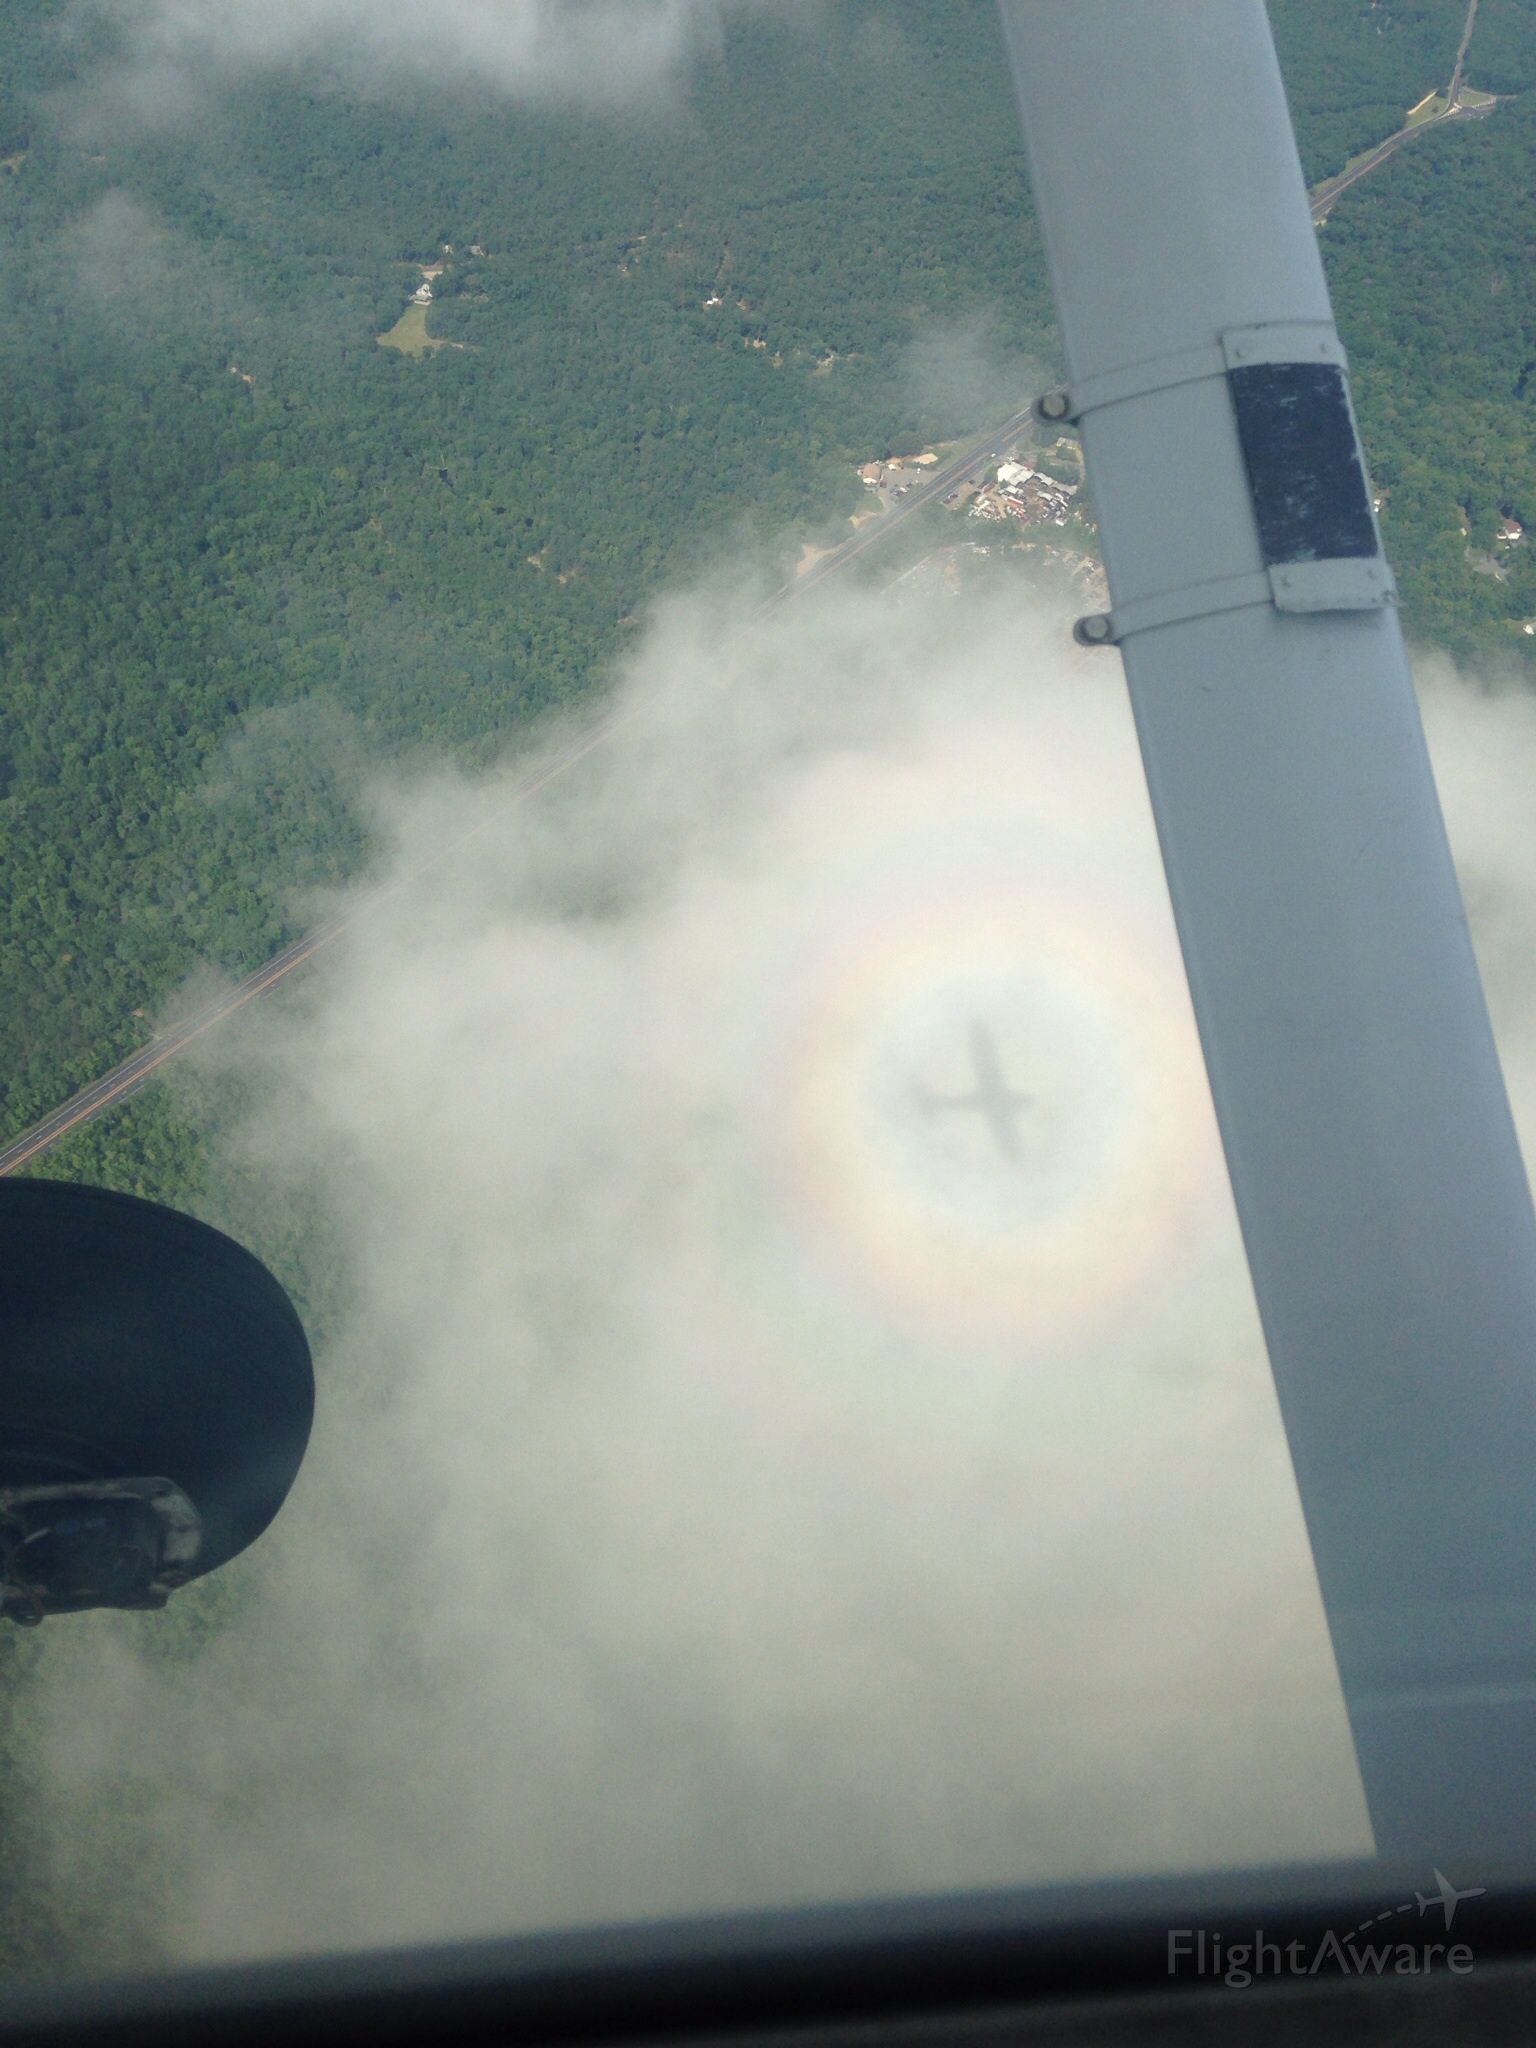 Experimental 100kts-200kts (N1075F) - Saw my shadow took the pic and then afterwords noticed the rainbow around the plane